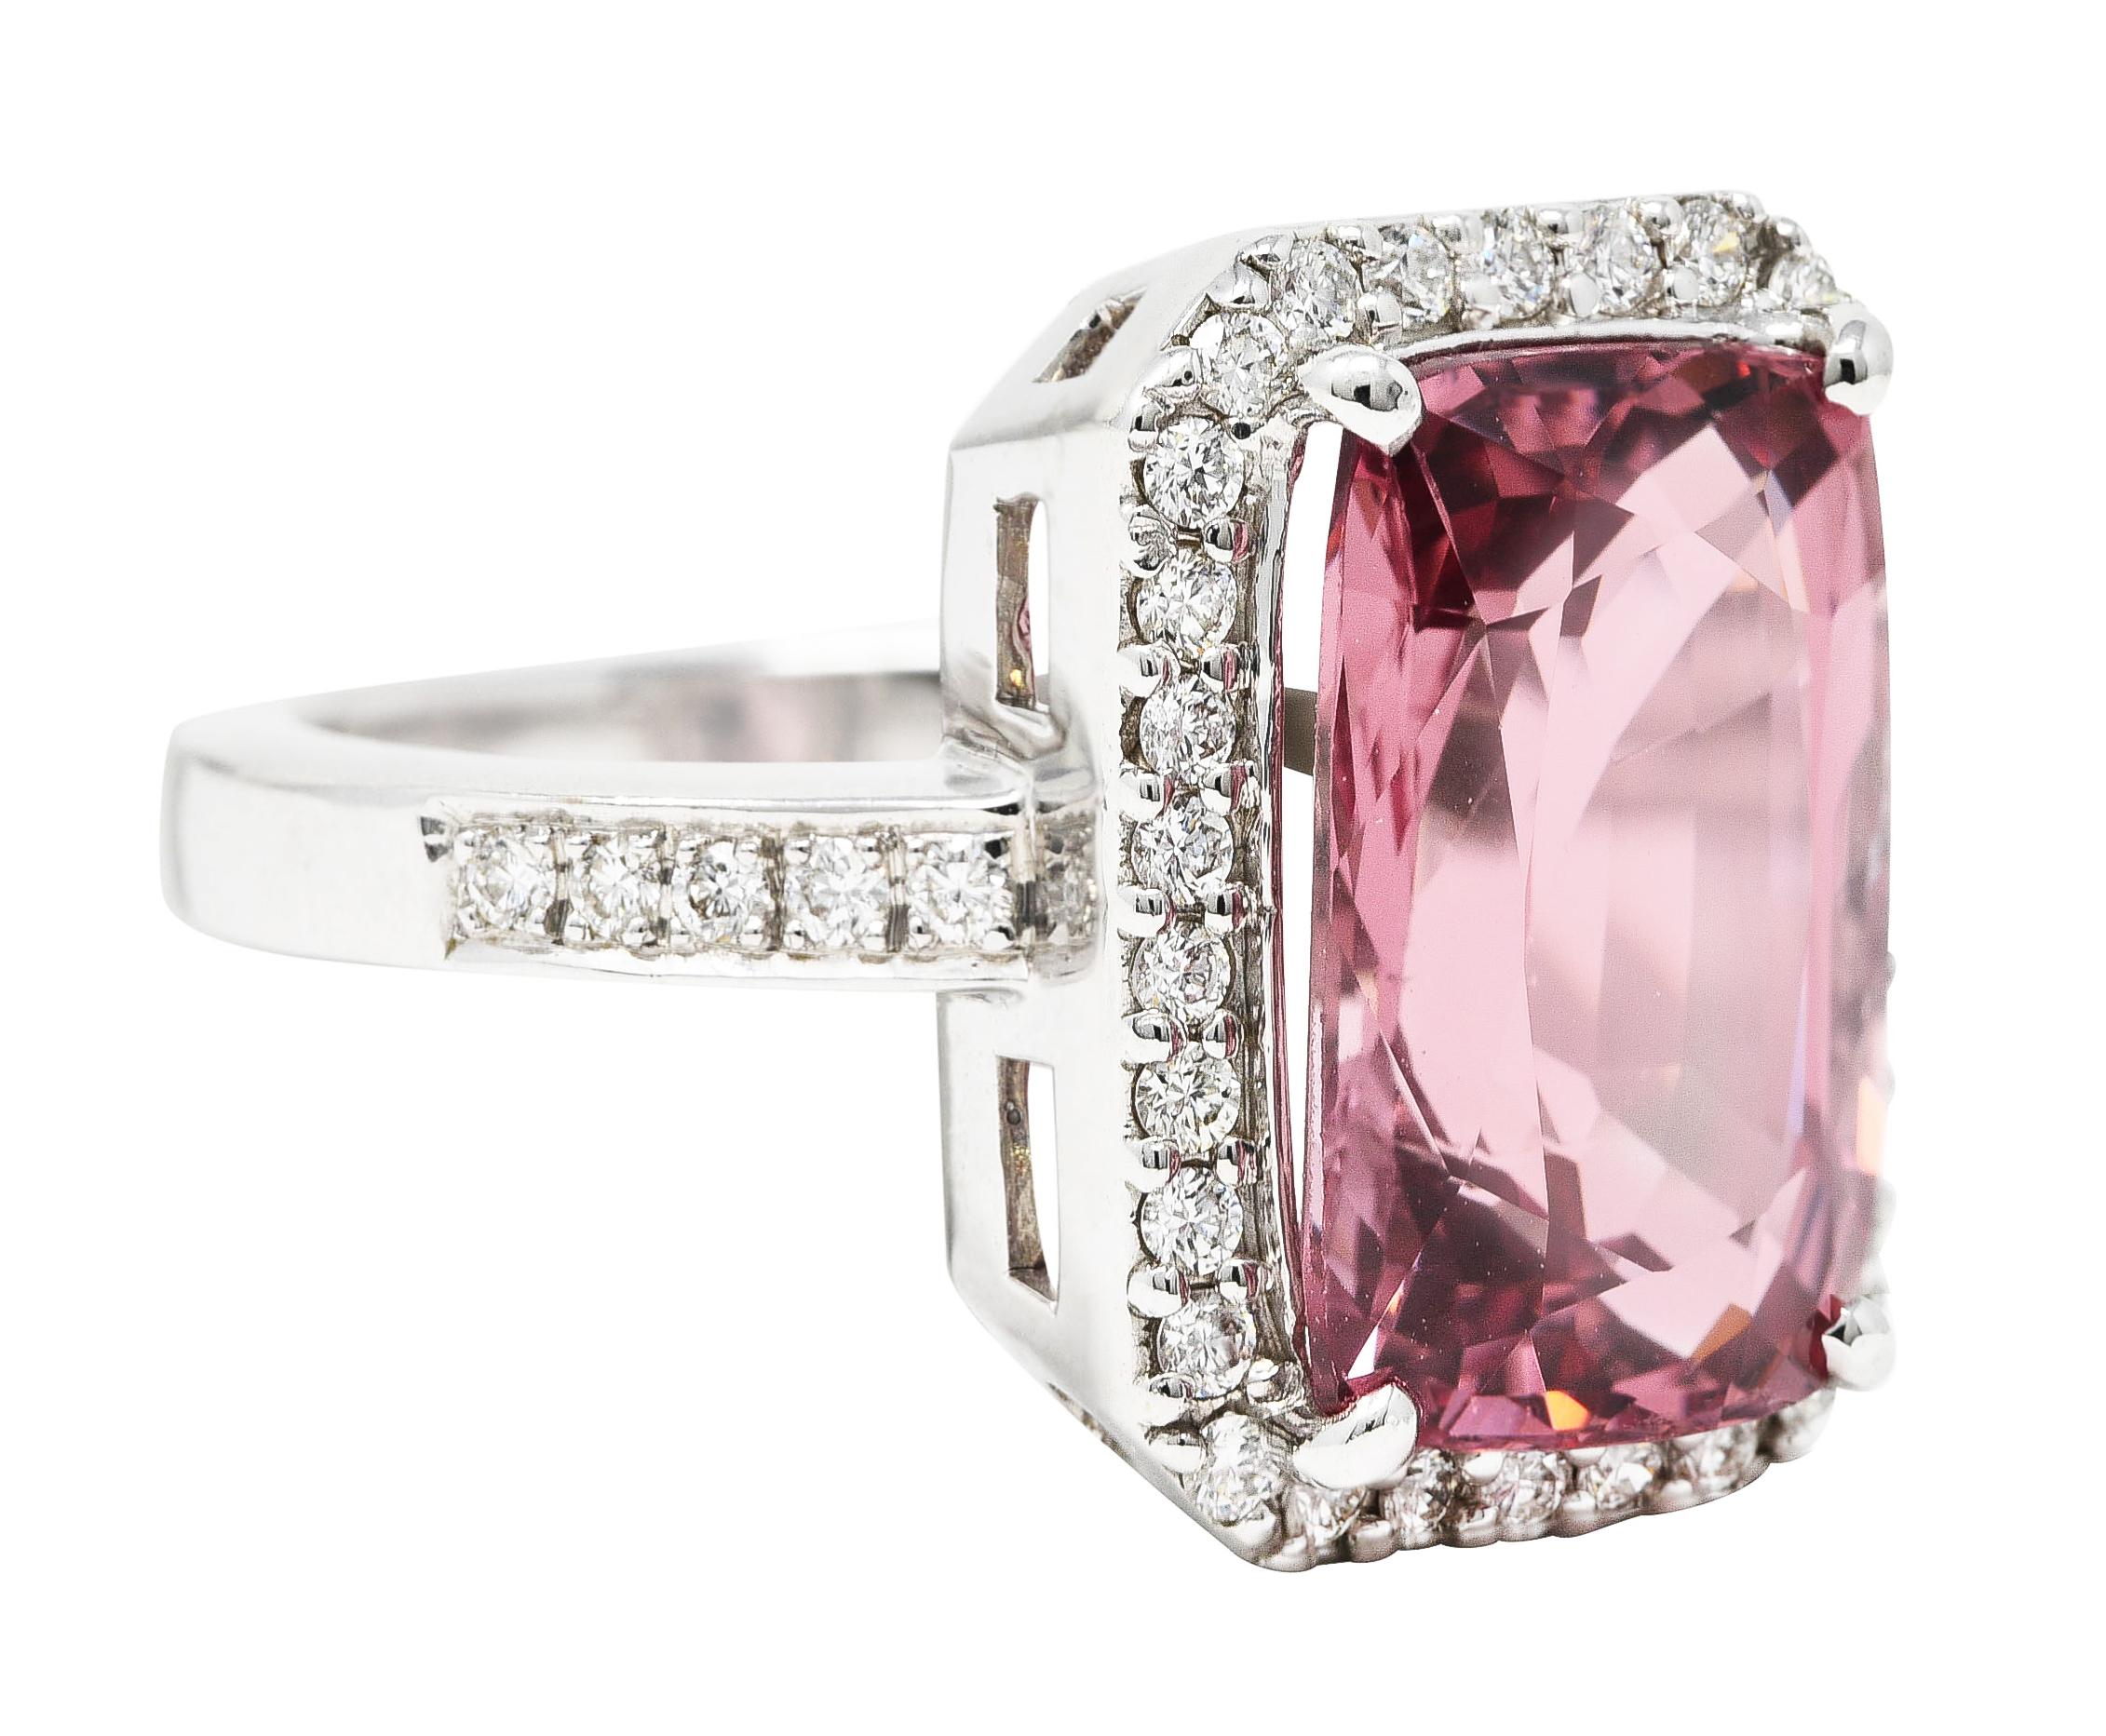 Centering and elongated cushion cut spinel weighing approximately 6.12 carats total. Transparent brownish-pink in color with light to medium saturation. Prong set with a halo surround of round brilliant cut diamonds. Bead set with additional